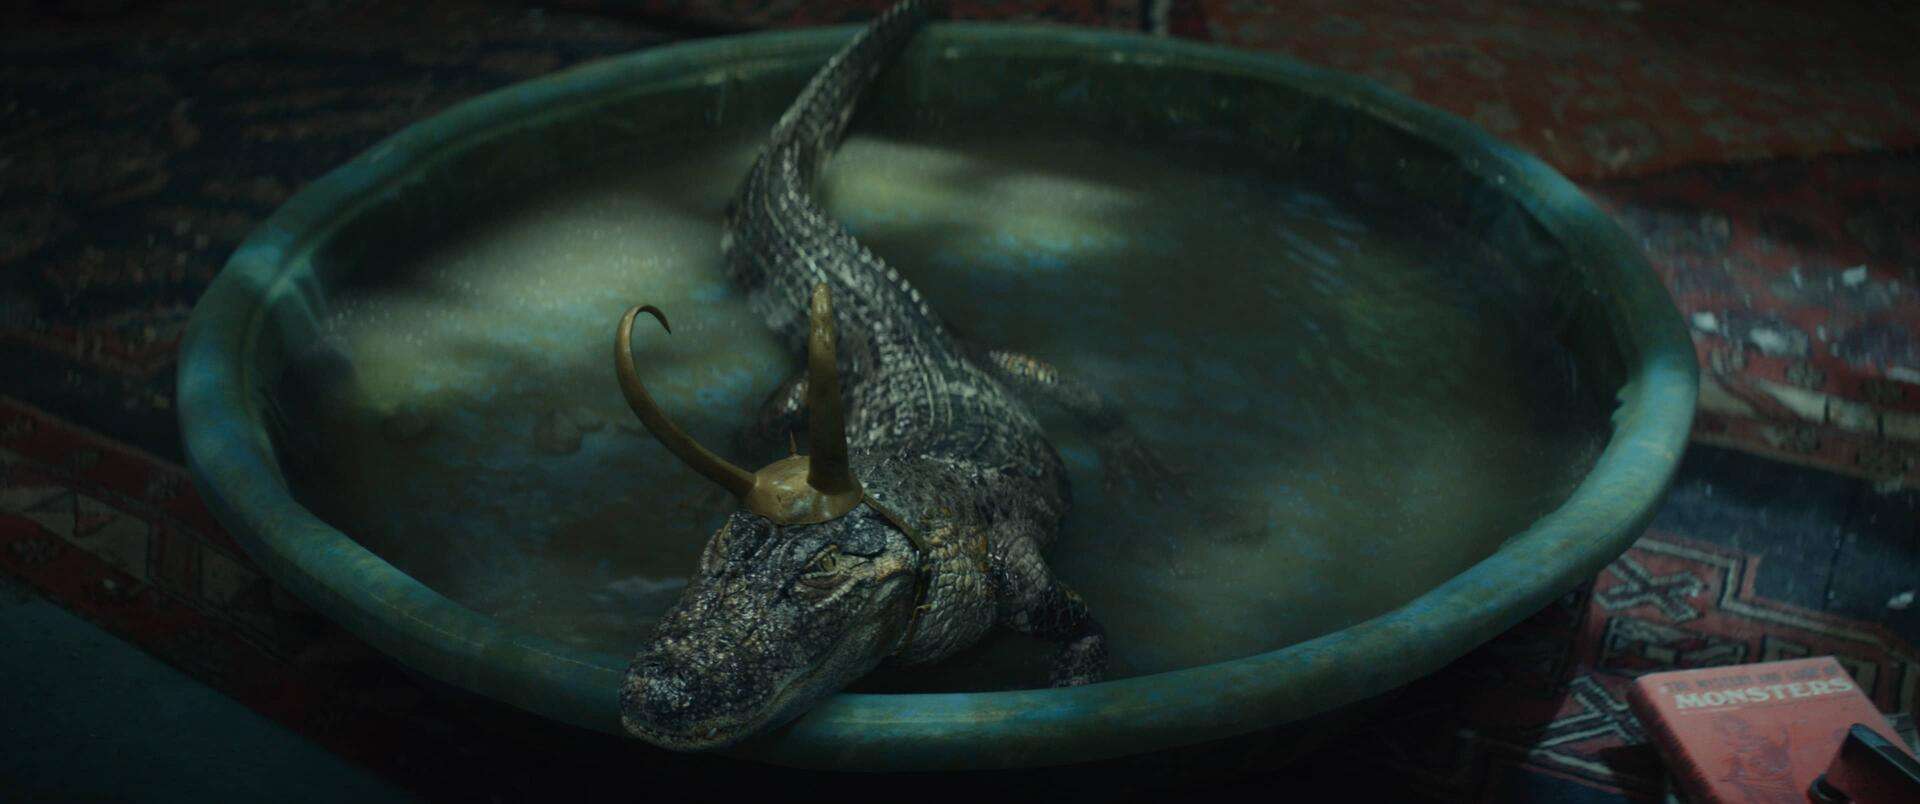 Is The Alligator A Loki Variant? Mobius’ Statement About The Variant Cause Fans To Think It’s A Spy